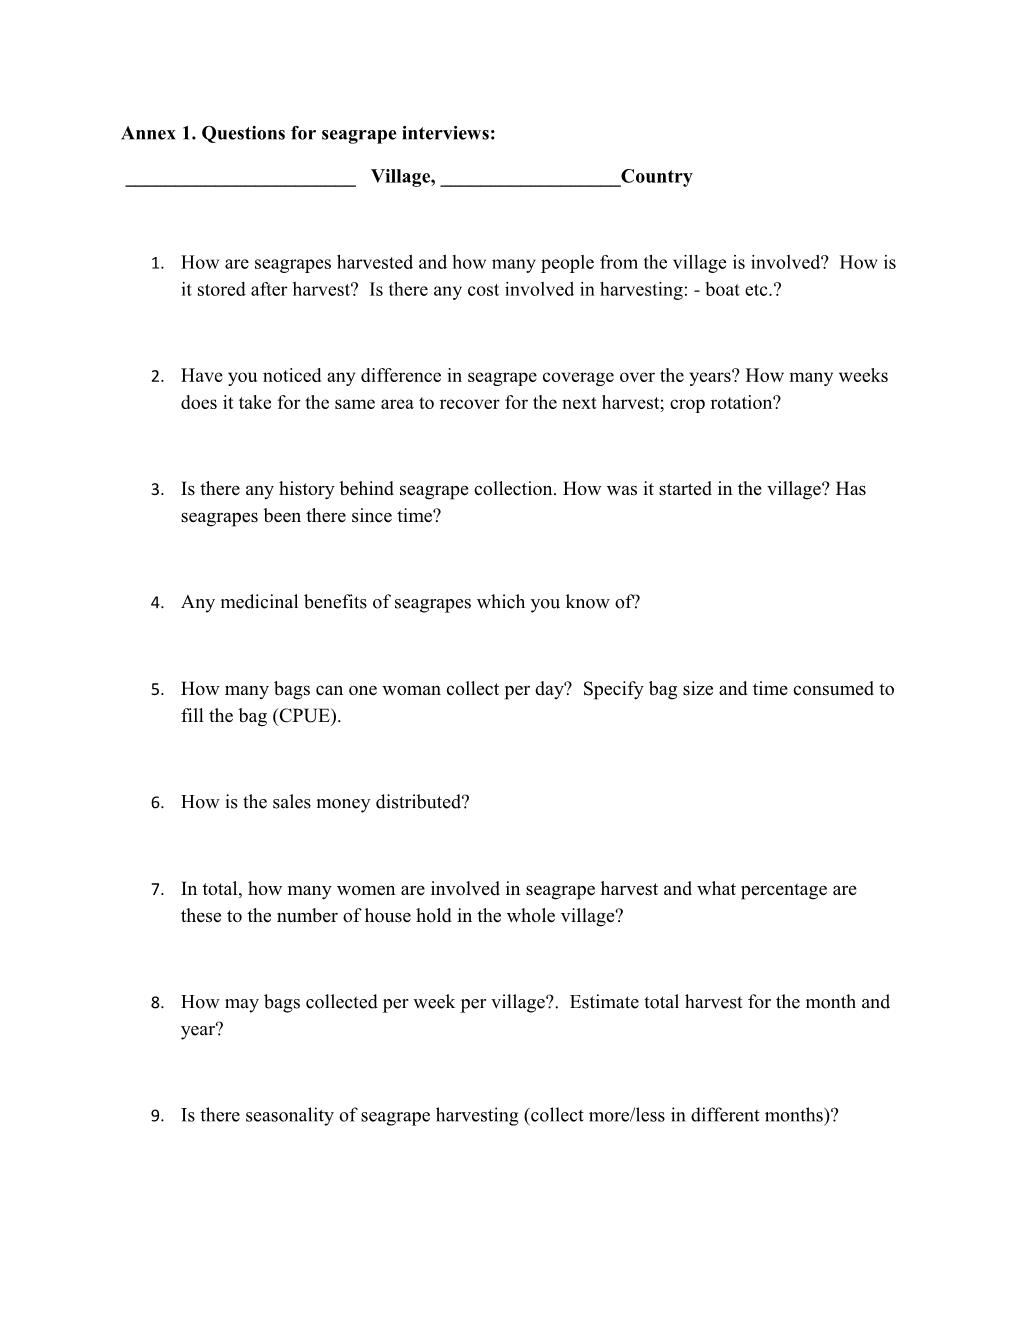 Annex 1. Questions for Seagrape Interviews